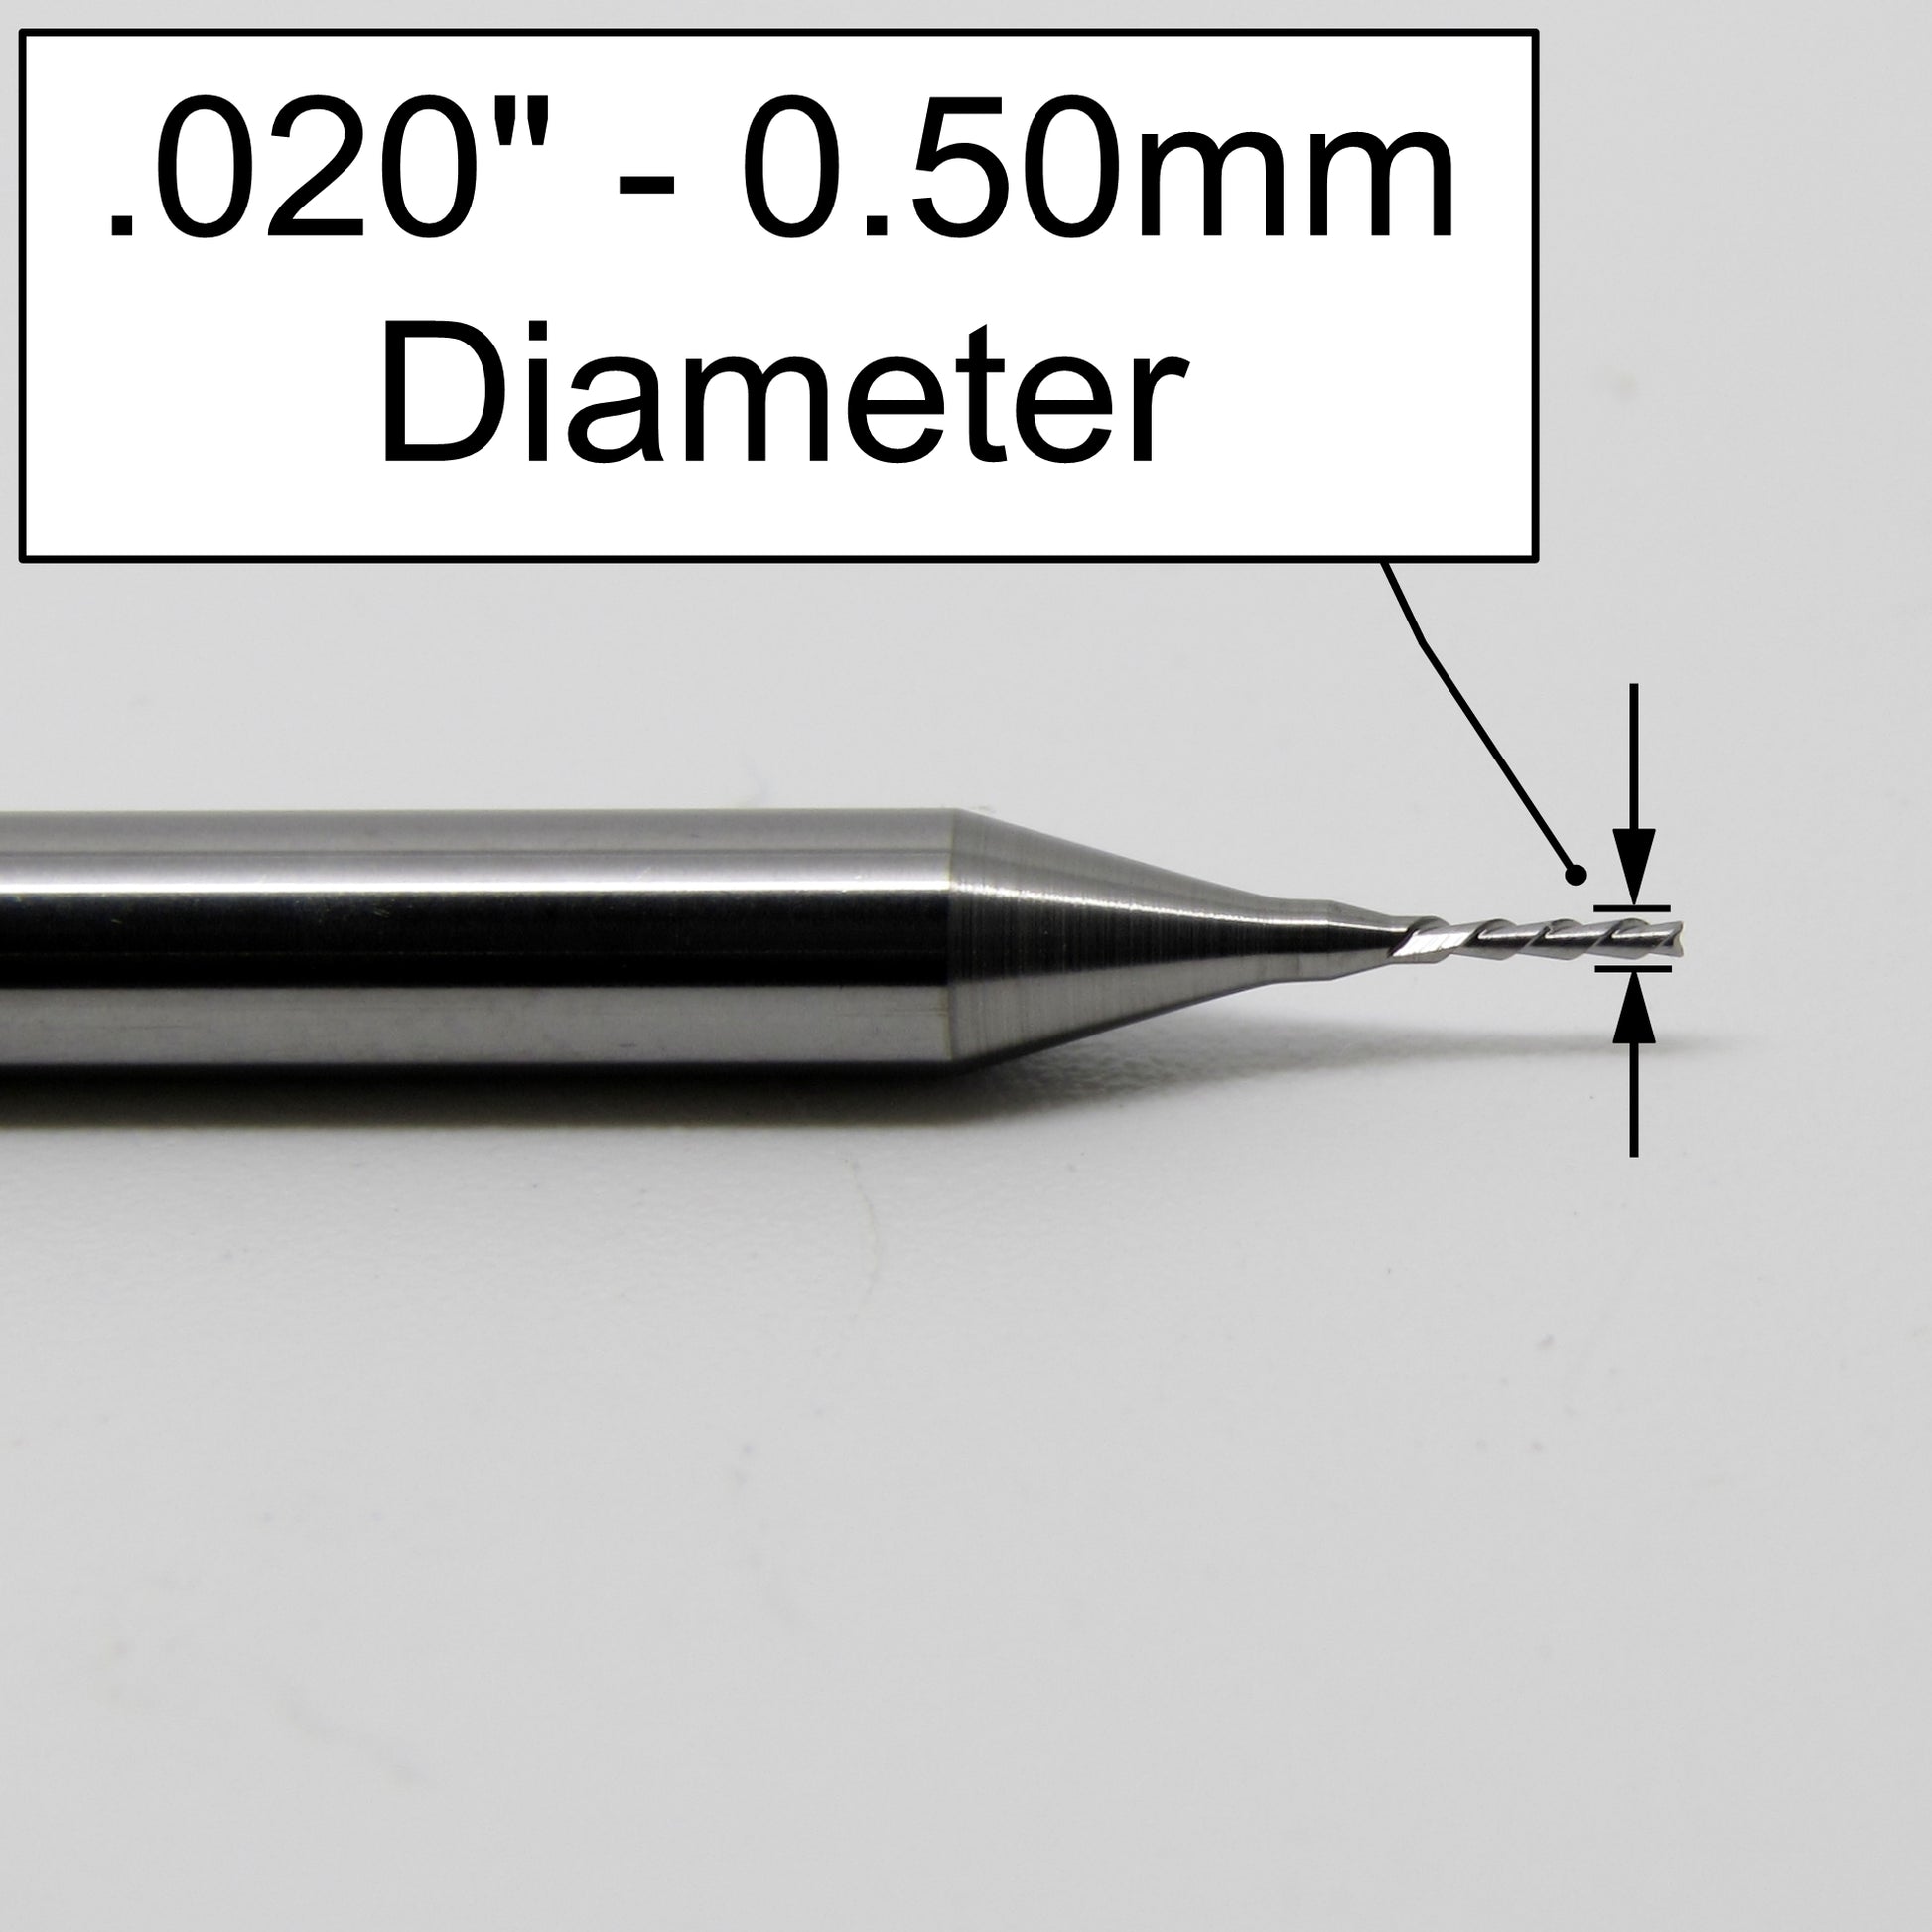 .020"  0.50mm Down Cut Two Flute Carbide End Mill